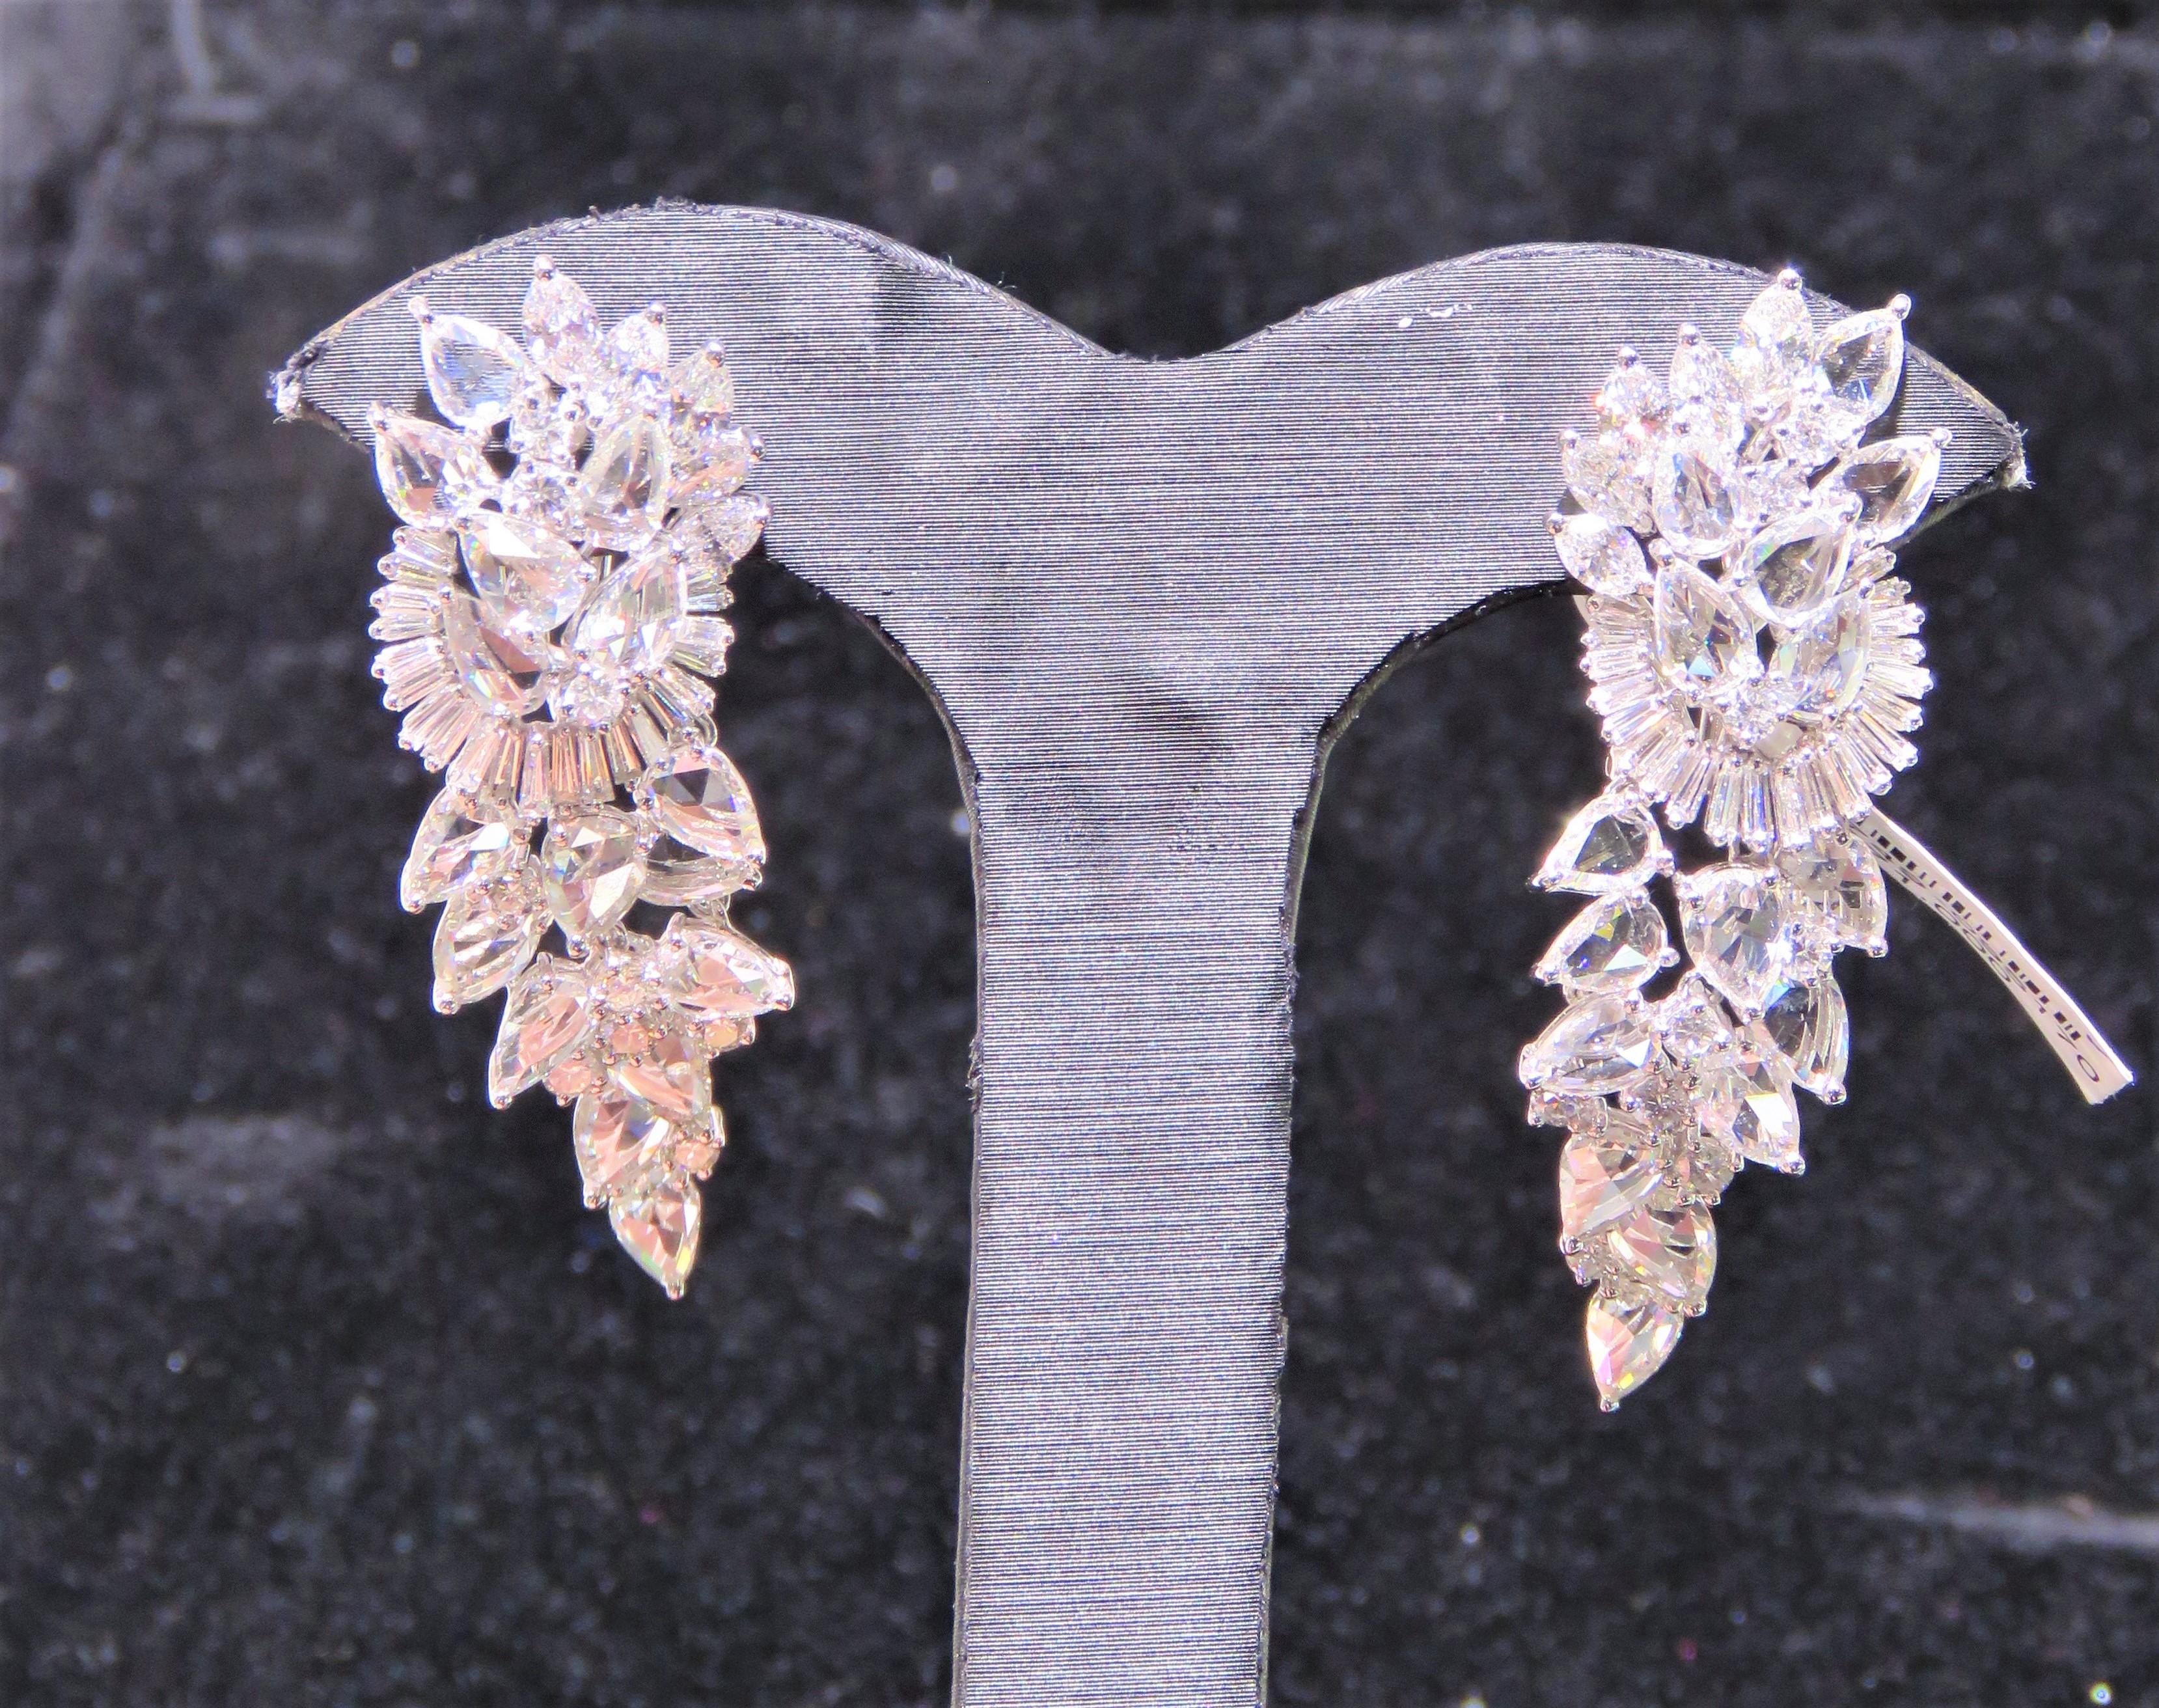 The Following Item we are offering are these Magnificent 18KT Gold Extremely Rare Beautiful Fine Large Fancy Rose Cut Diamond Dangle Earrings. Each Earring features Rare Gorgeous Glittering Fancy Large Marquise Shaped Rose Cut Diamonds Draping with